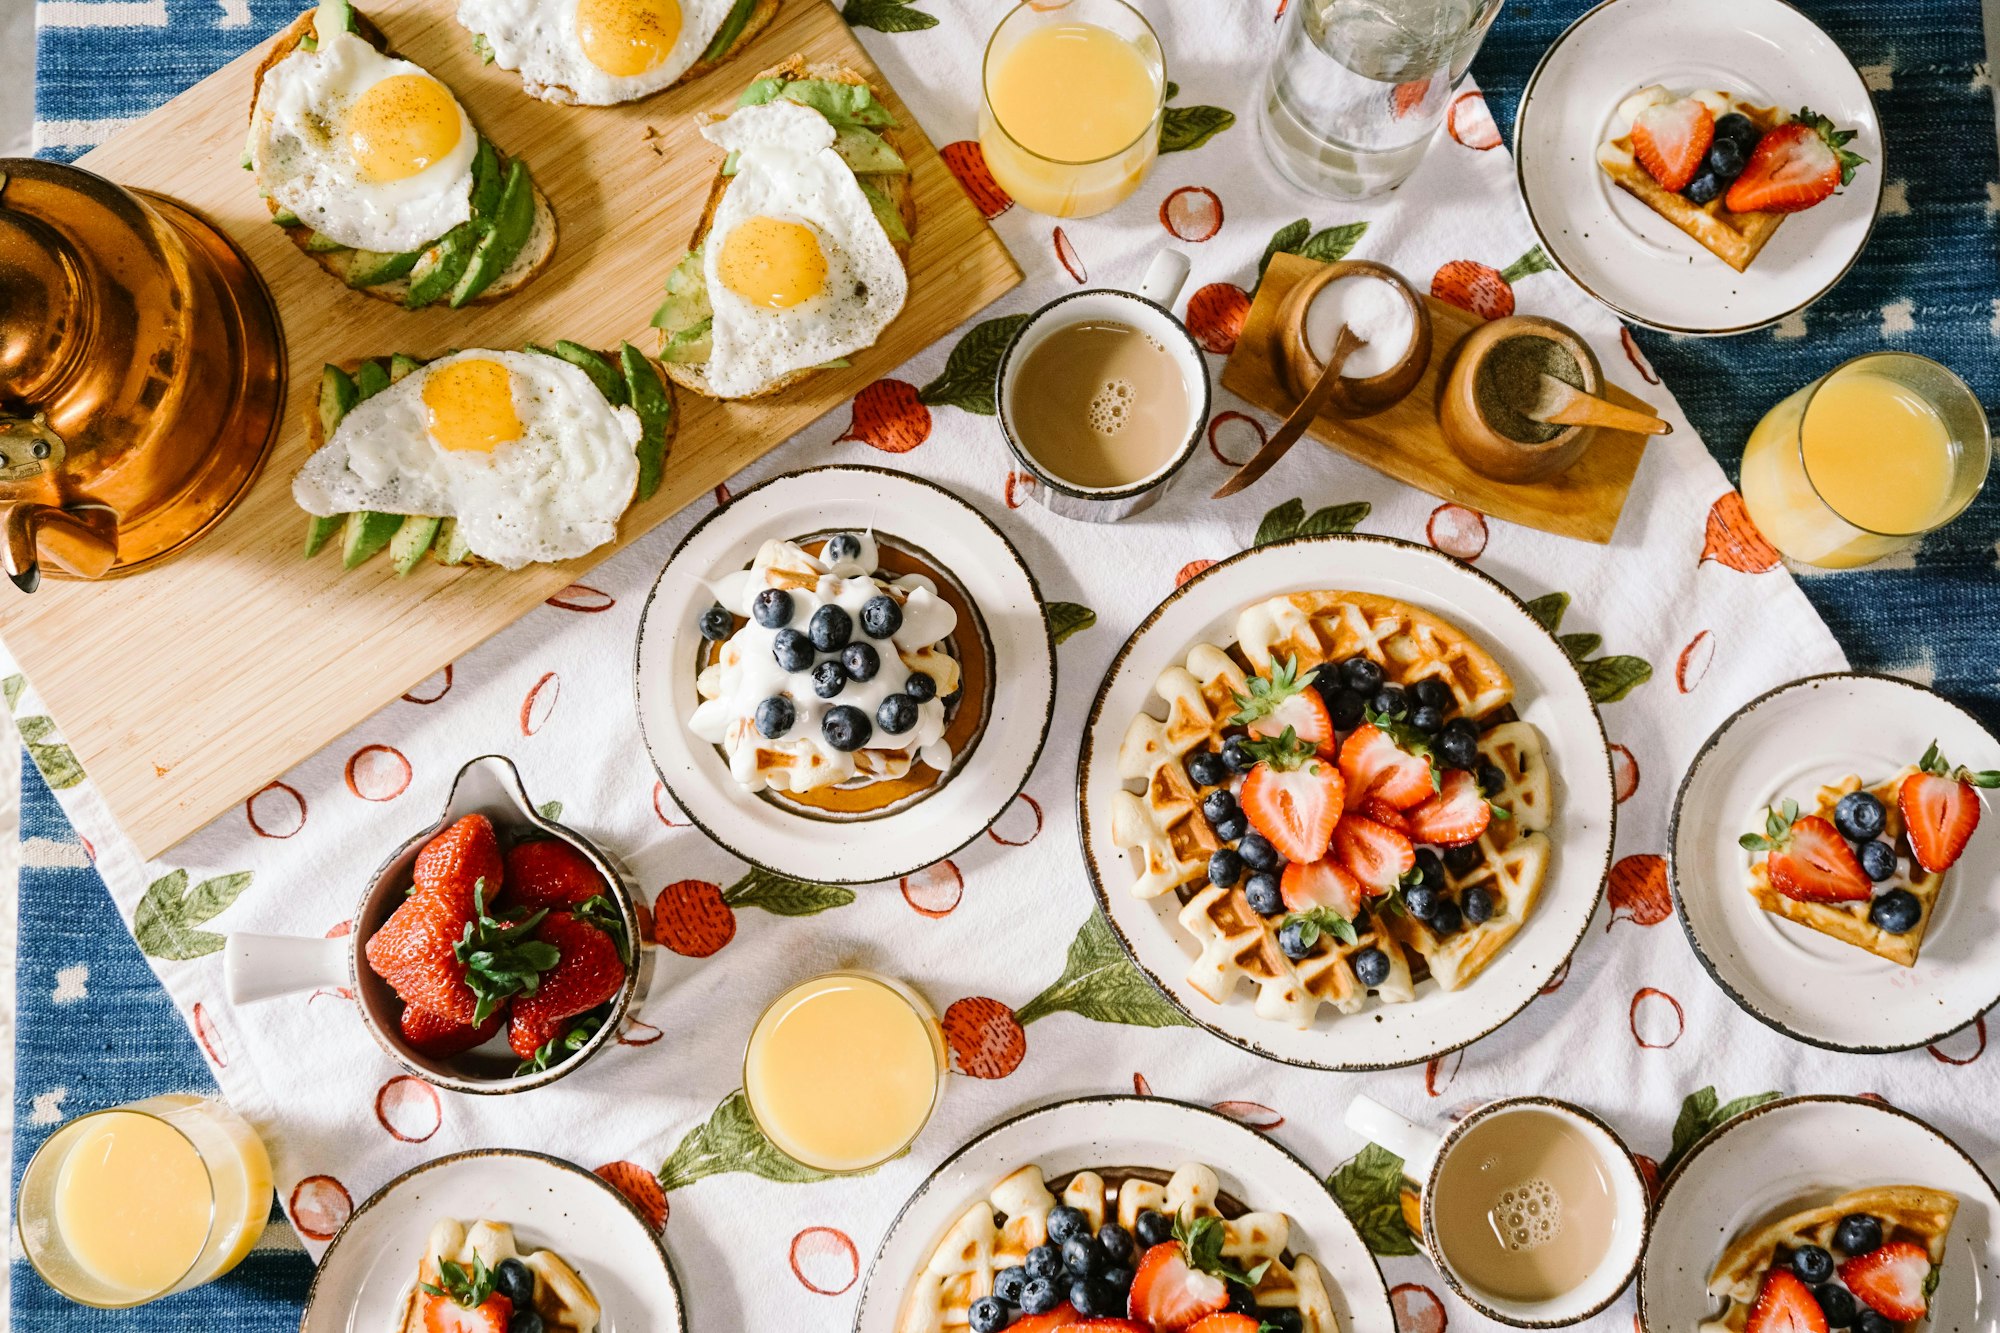 What Is The Most Popular Breakfast Food In America?